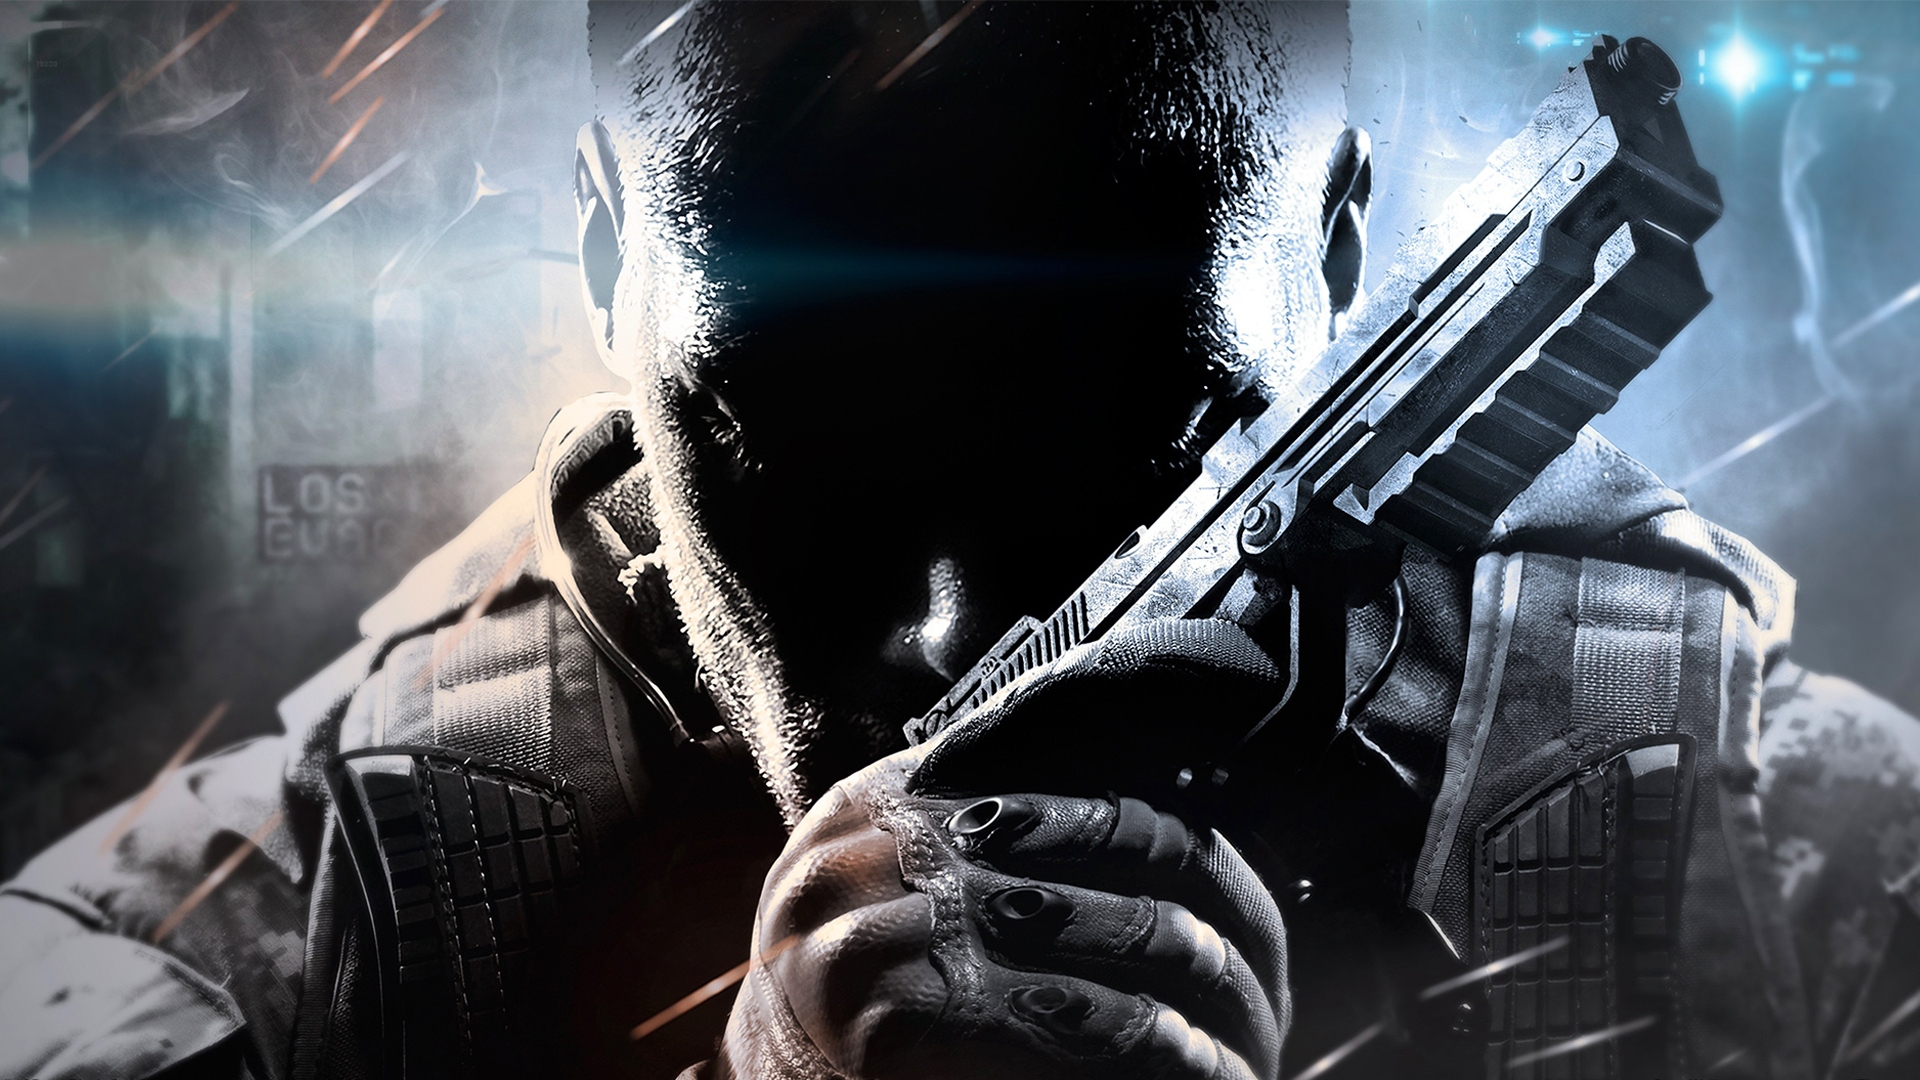 57 Call Of Duty: Black Ops II HD Wallpapers | Backgrounds